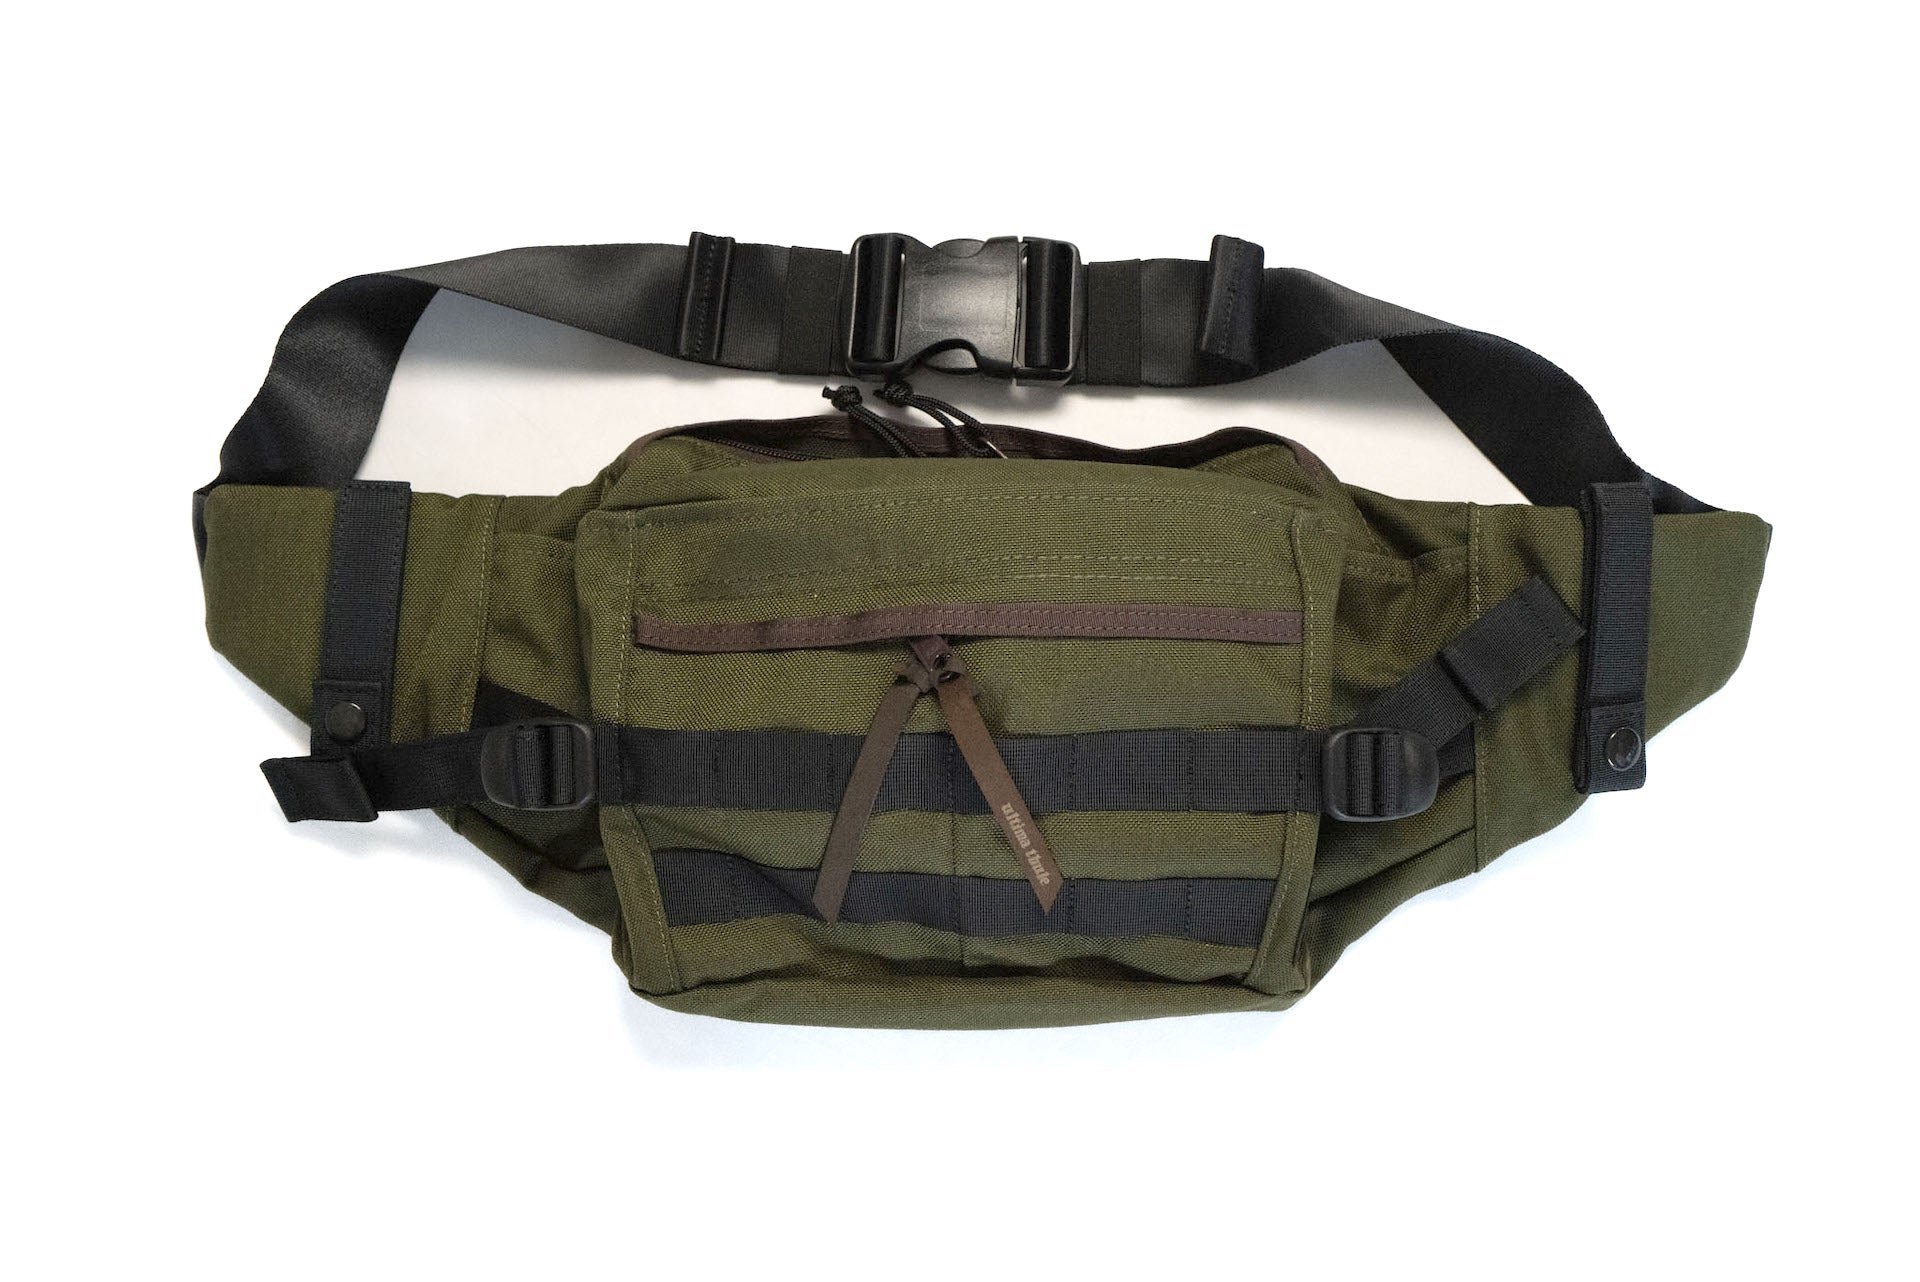 Ultima Thule by Freewheelers "HALF DOME" Fanny Pack (Olive)